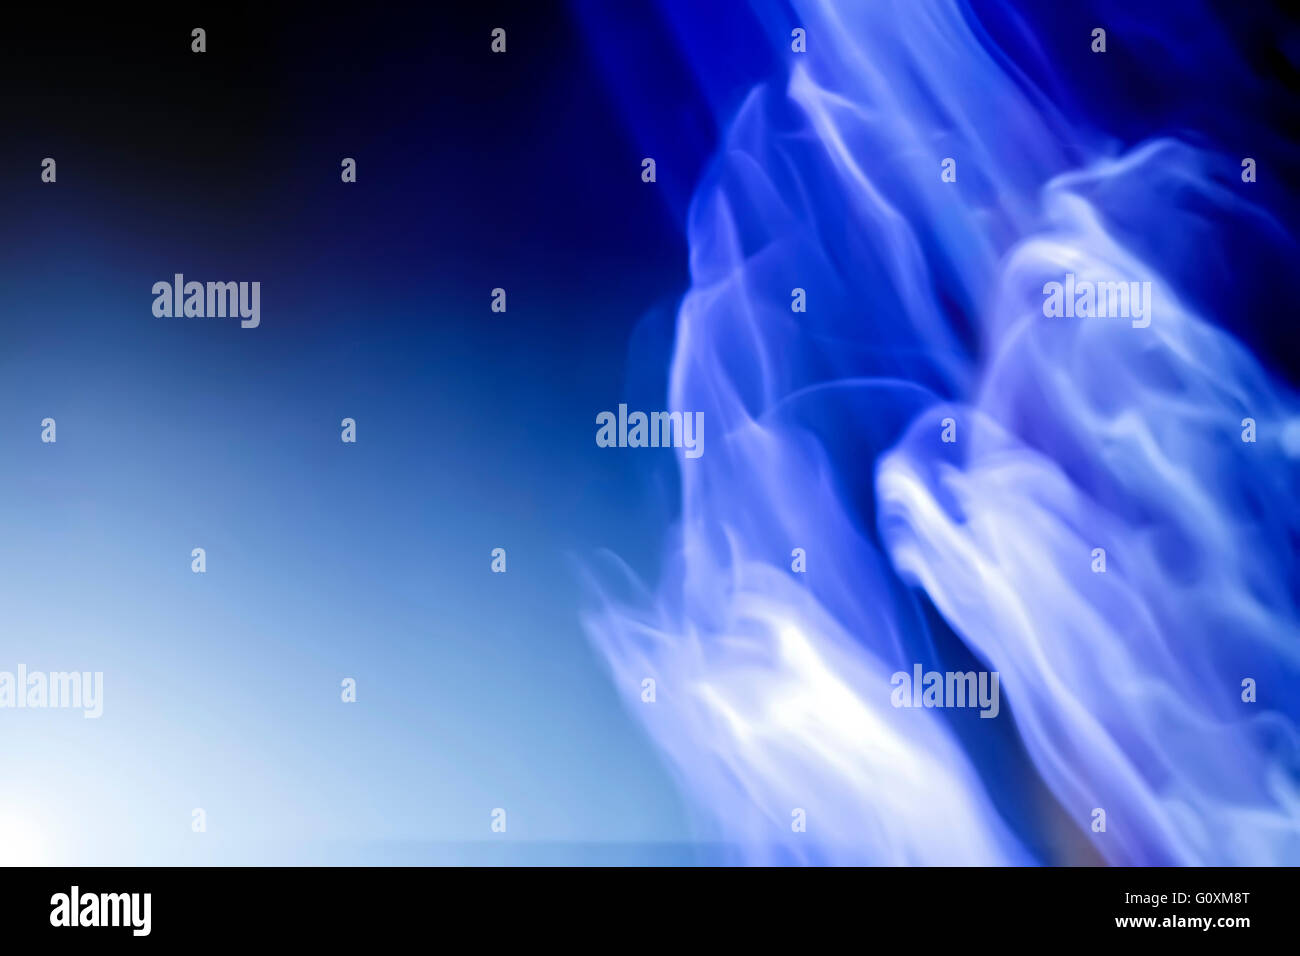 White silhouettes of ghosts on blue background Stock Photo